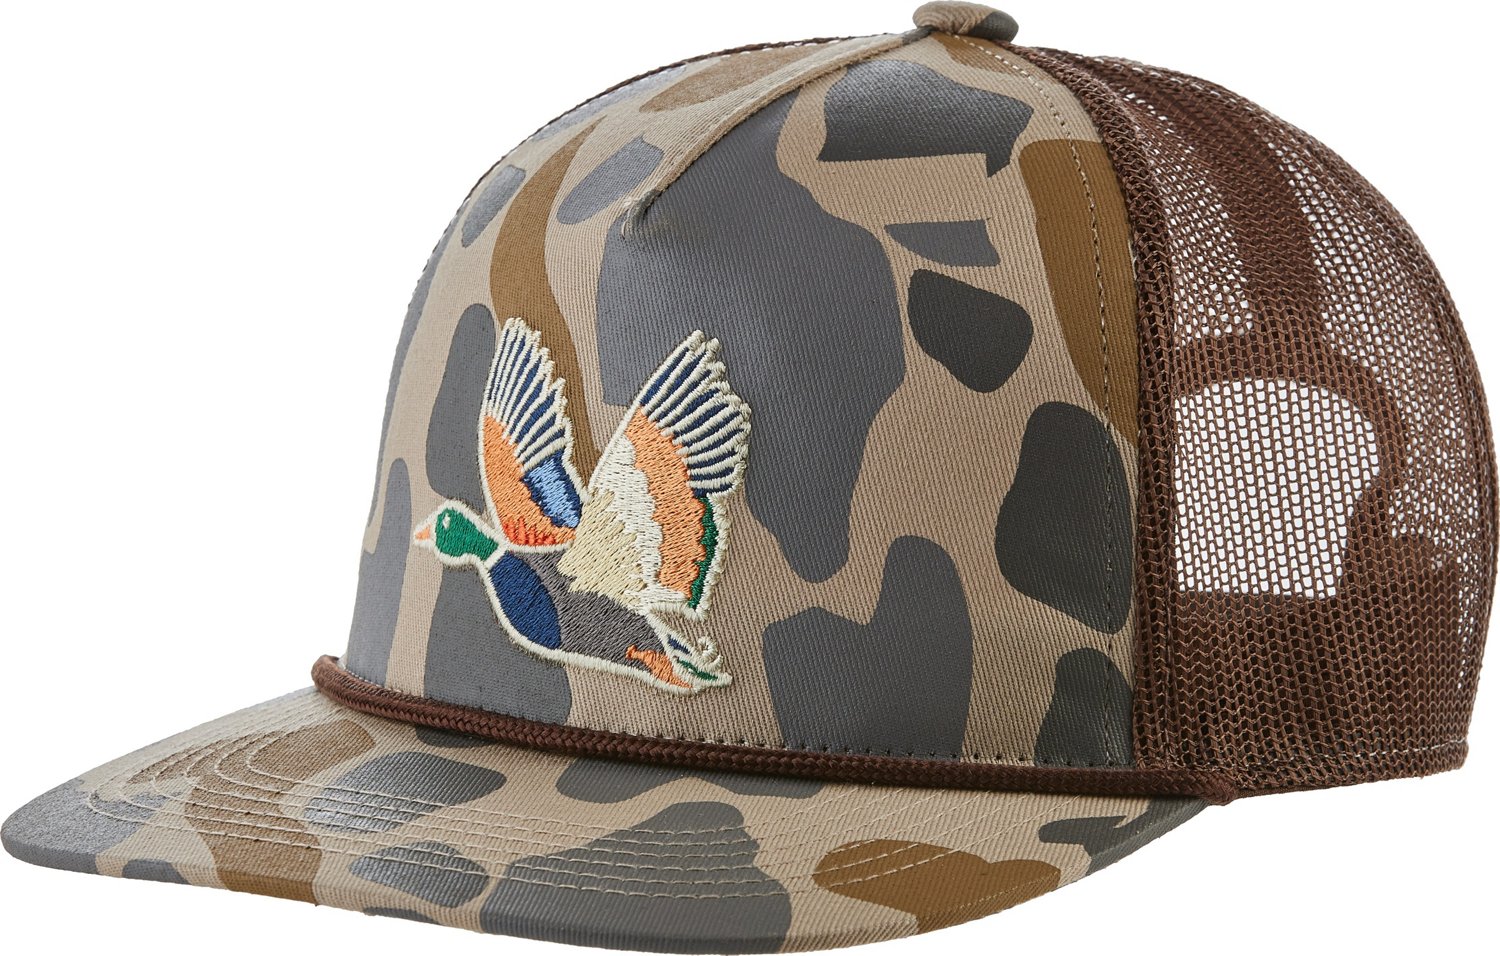 Hunting Game Series Hats – Duck Camp